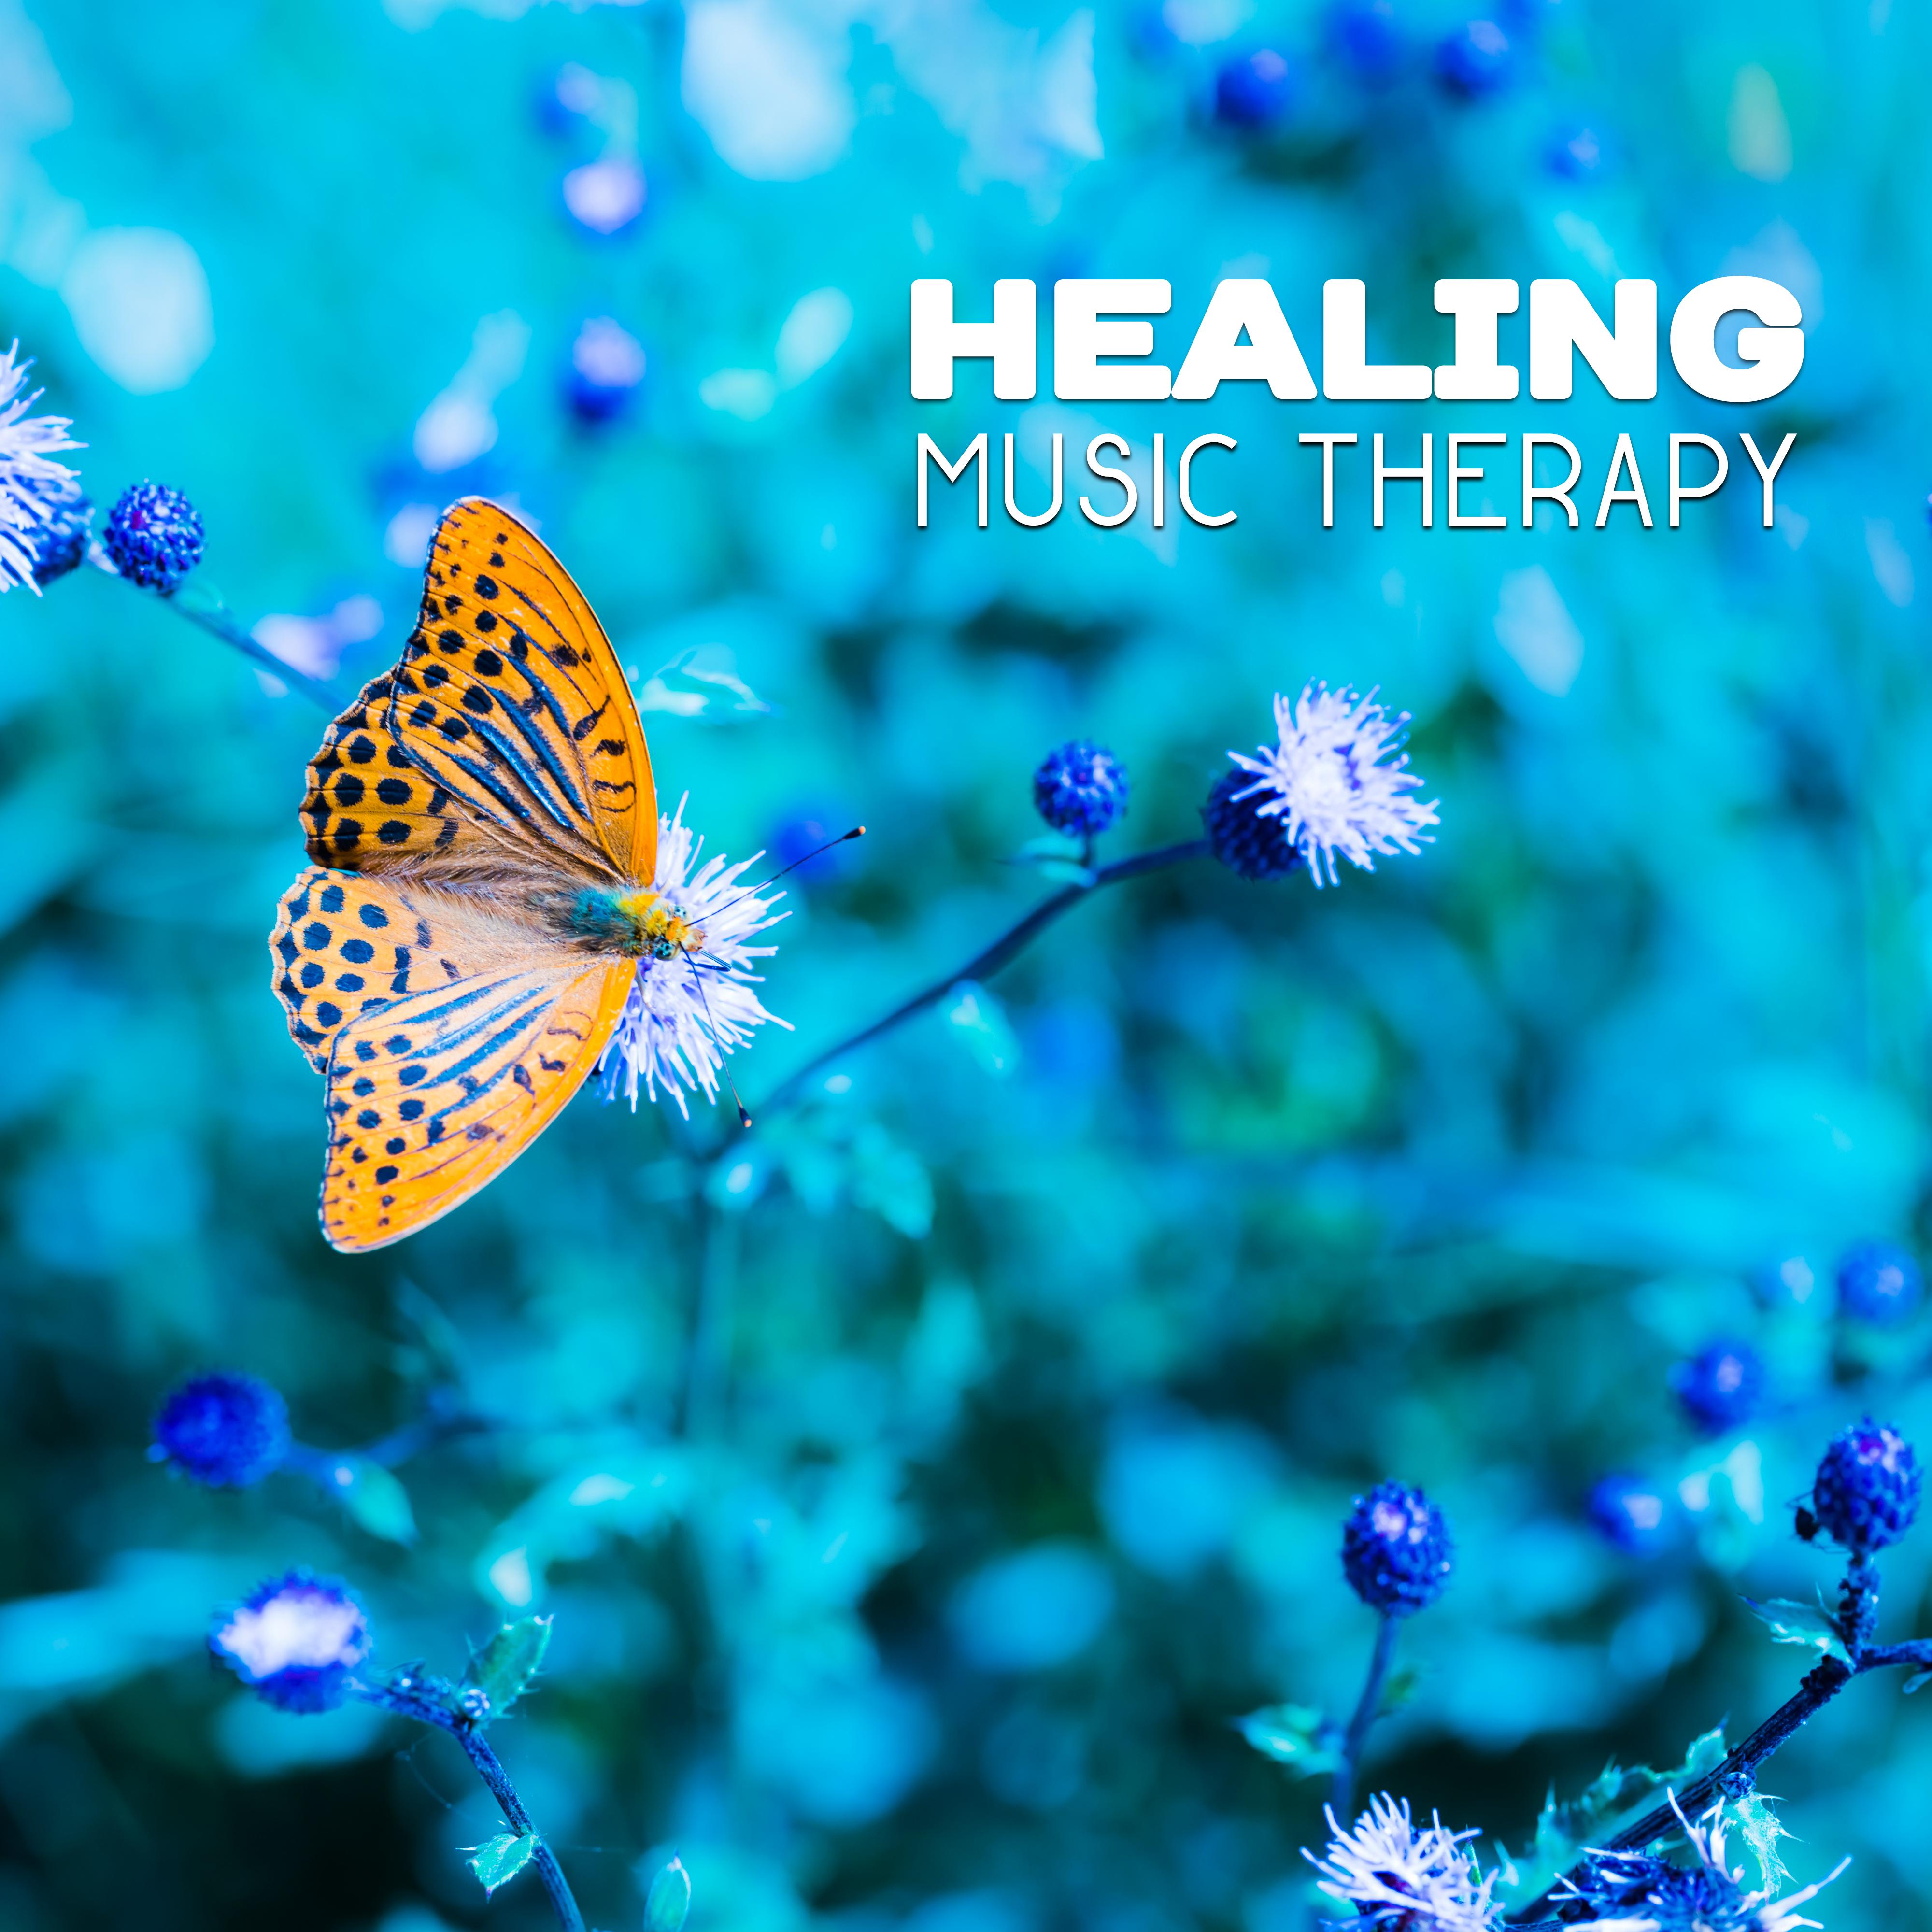 Healing Music Therapy – Relaxing Music Therapy, Rest, Stress Relief, Nature Sounds, Zen